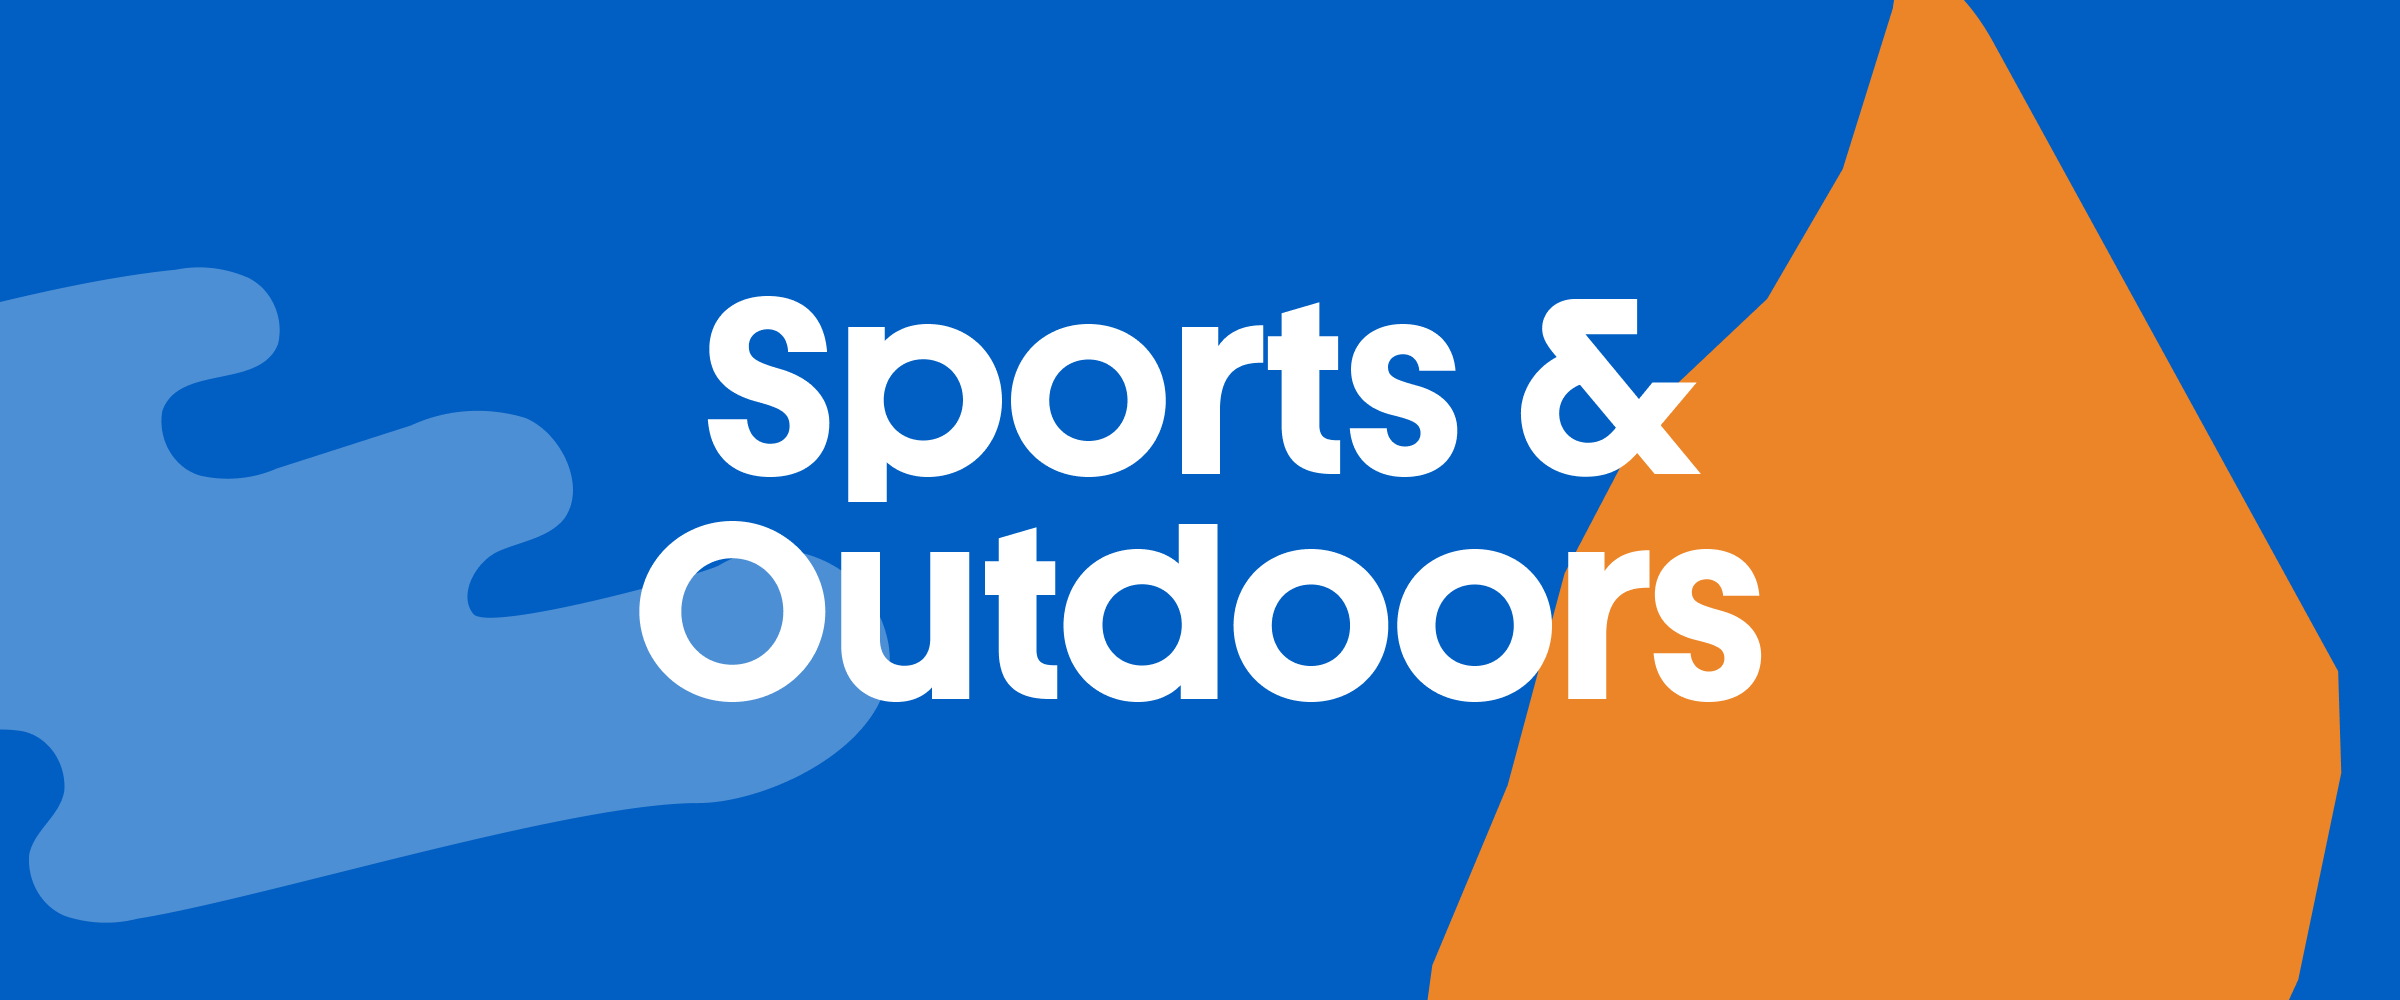 Shops Sports & Outdoors